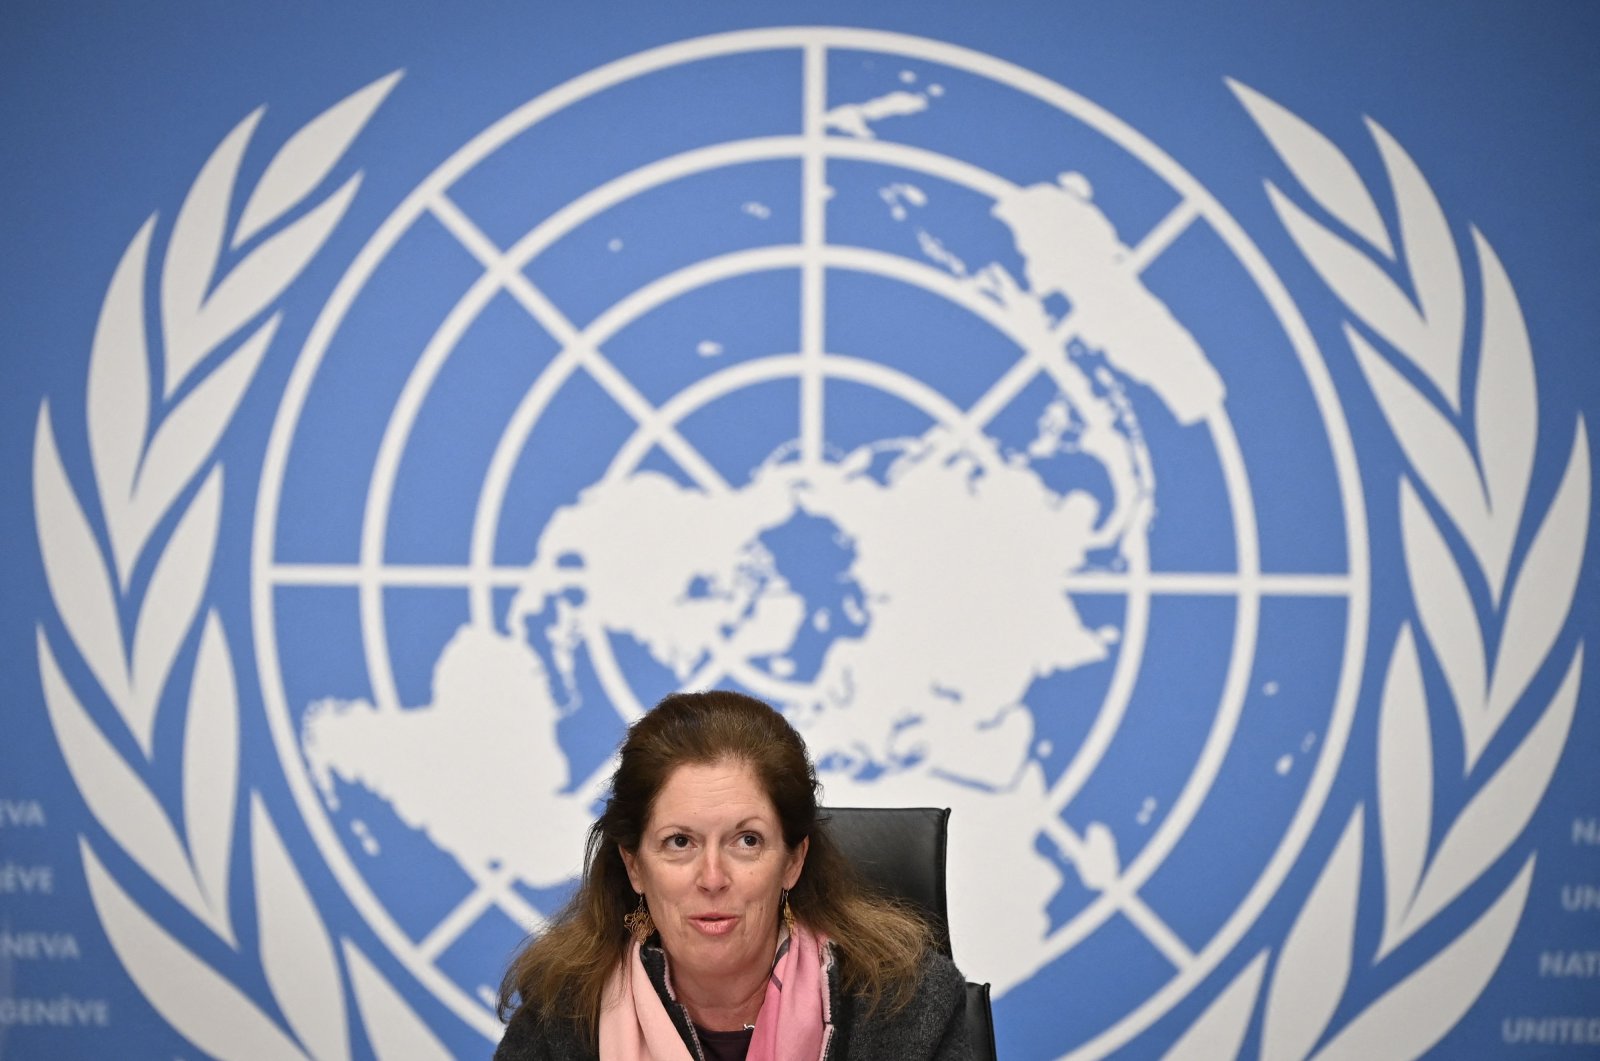 Deputy Special Representative of the U.N. Secretary-General for Political Affairs in Libya Stephanie Williams speaks during a press conference in Geneva, Switzerland, Feb. 5, 2021. (AFP File Photo)